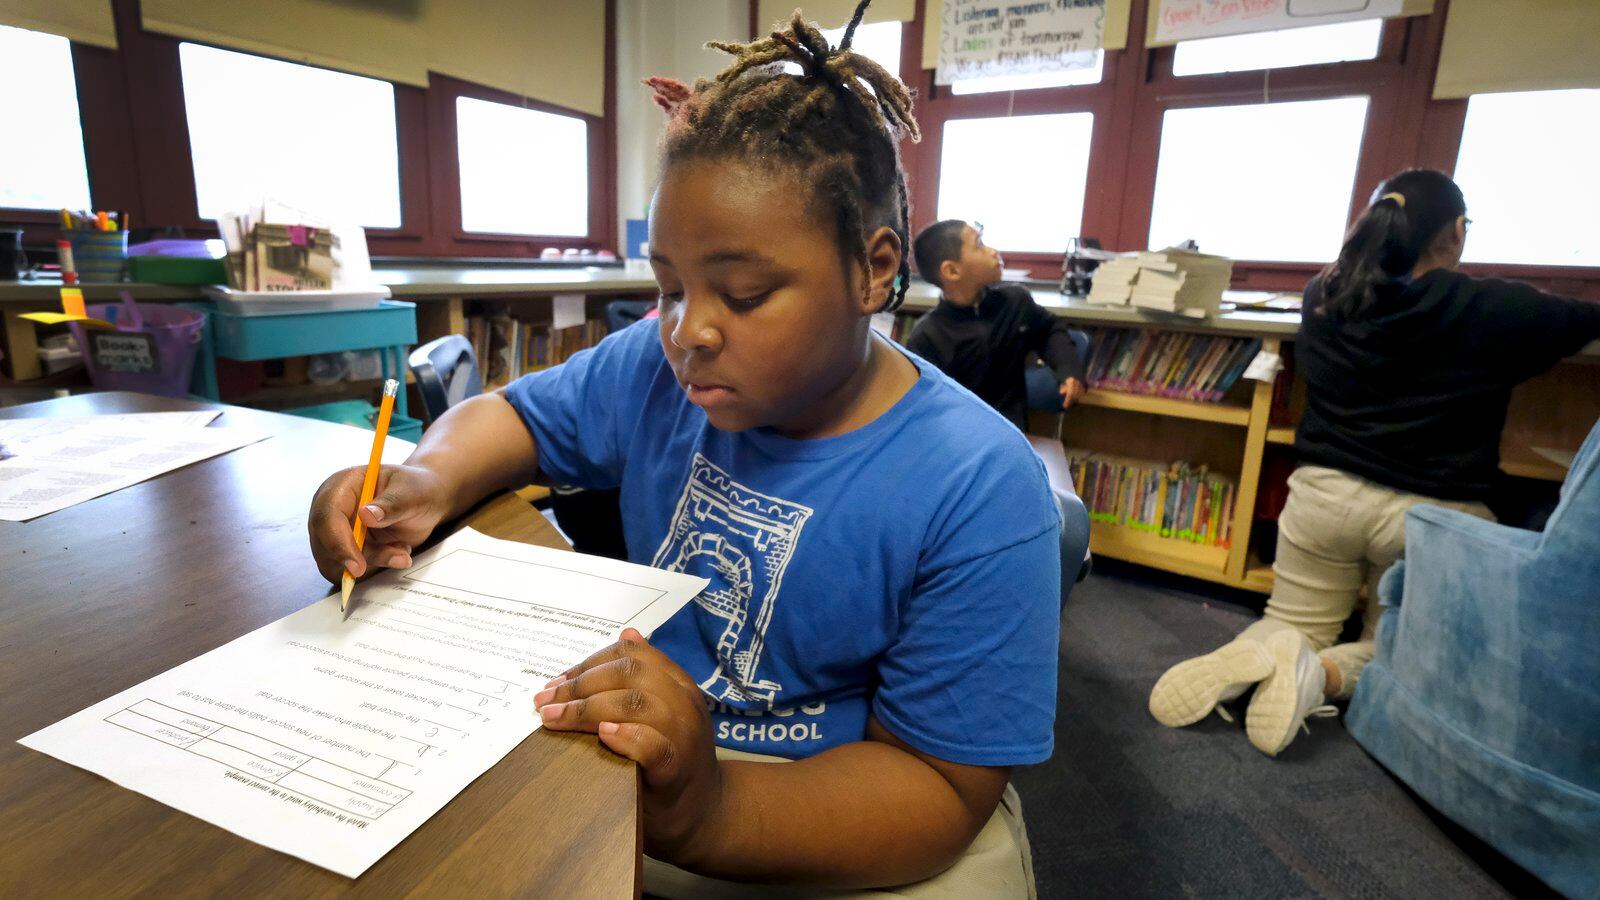 A student with a pencil works at a desk in a classroom at Thomas Gregg Neighborhood School, an elementary school in Indianapolis, Indiana.